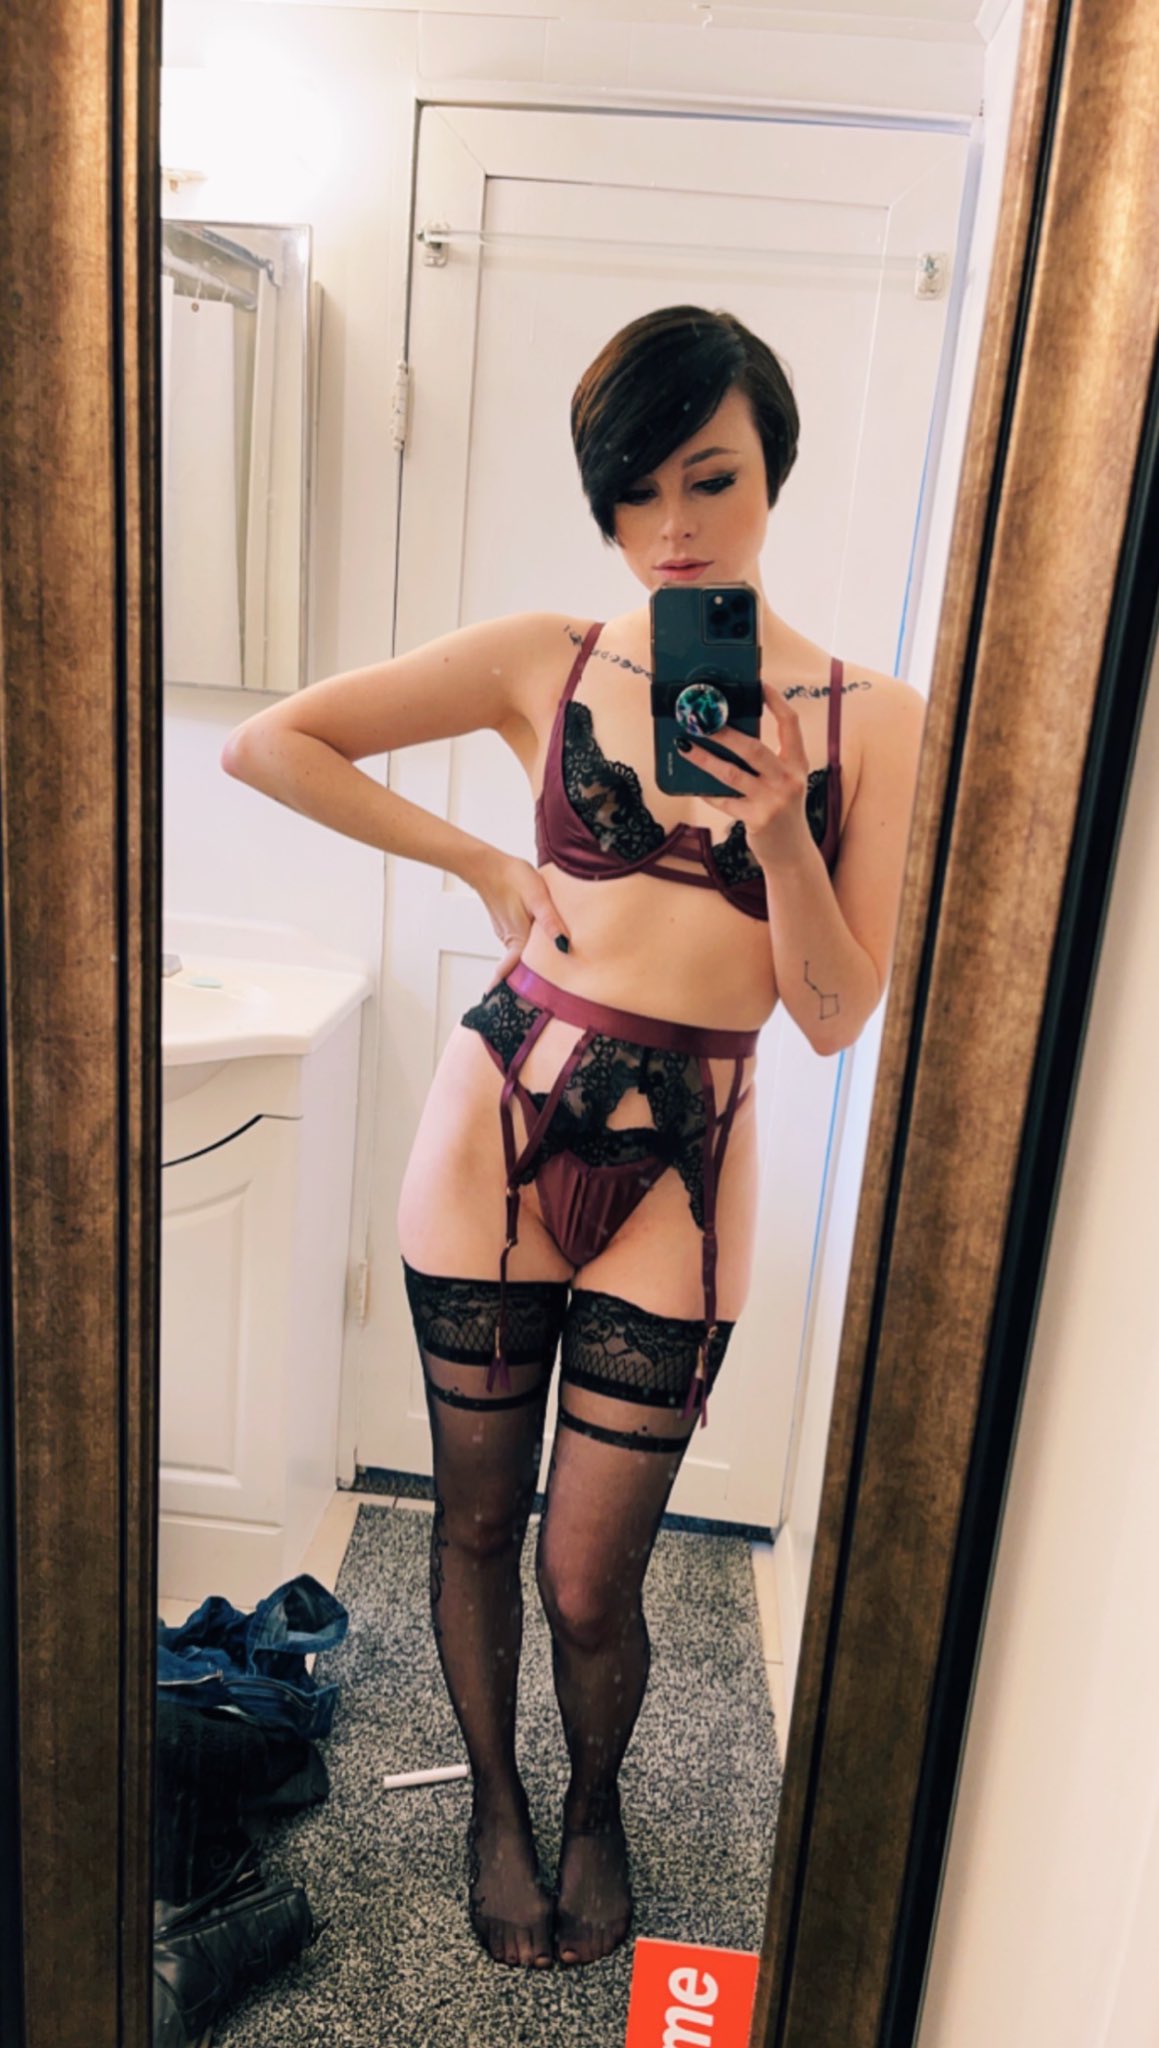 Harli Kane ➡️ PAX East on X: Reminiscing over my first boudoir